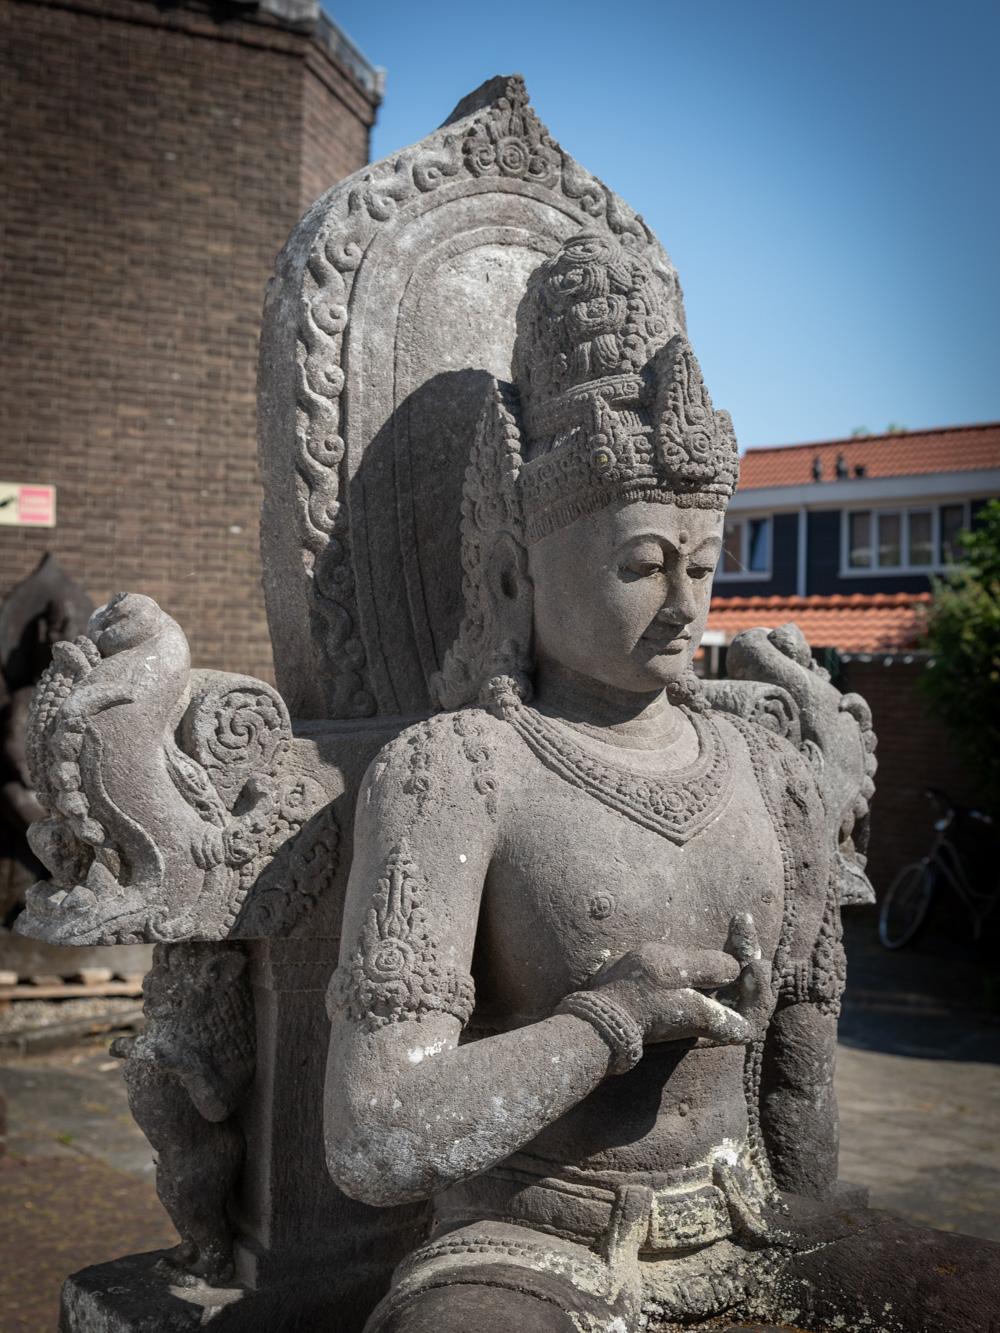 The very large old lavastone figure of Bodhisattva Avalokiteshvara is a truly impressive and monumental work of art. Crafted from lavastone, a material that holds cultural and geological significance in Indonesia, this statue stands at an